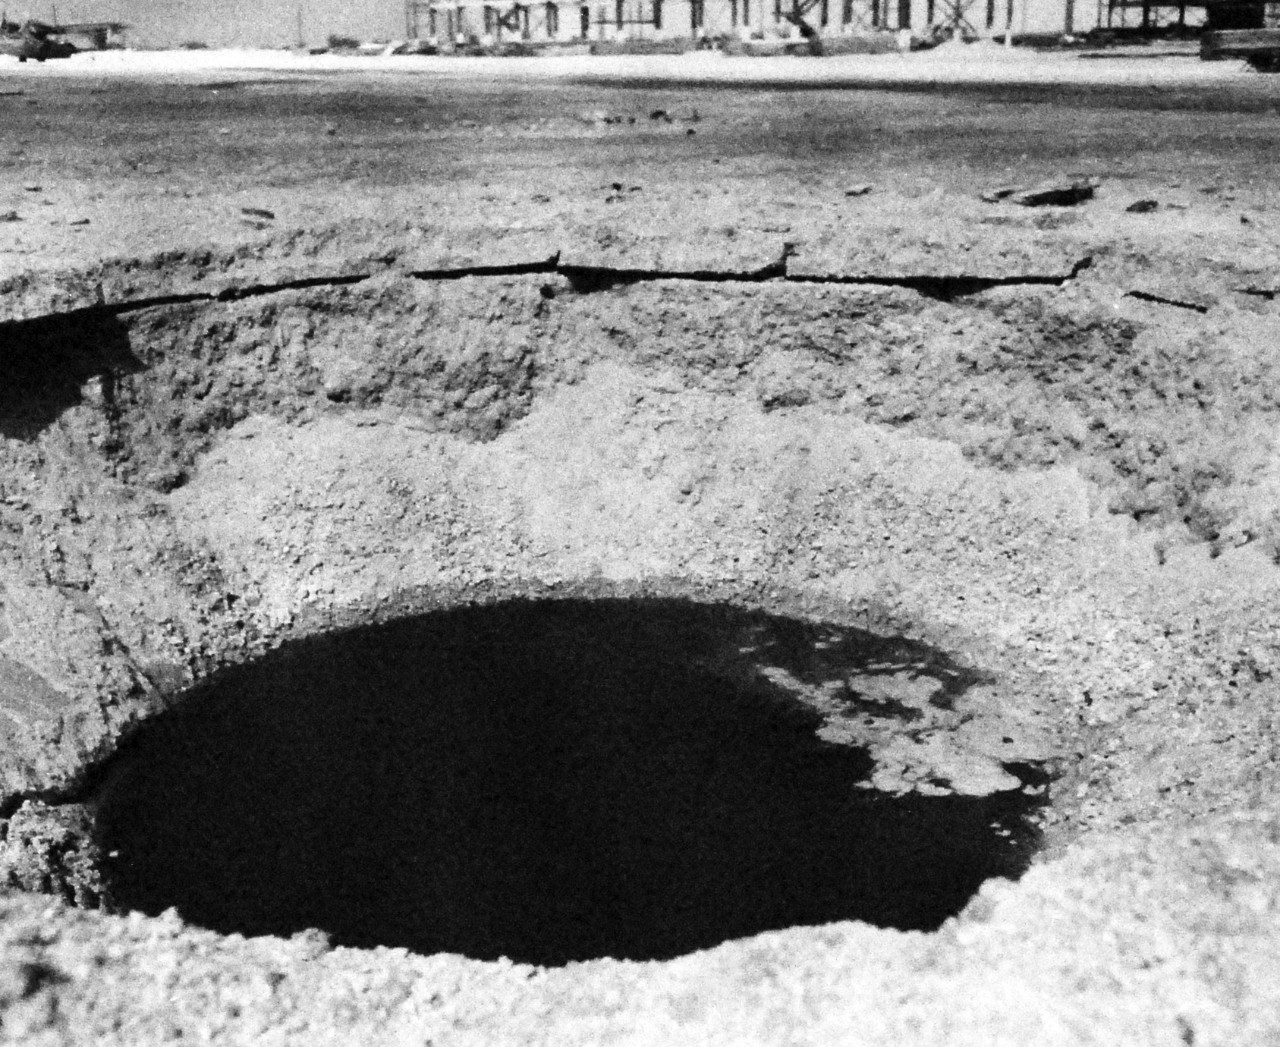 80-G-32846:  Japanese Attack on Pearl Harbor, December 7, 1941.   Bomb crater on apron at Hickham Field from the Japanese attack. . Official U.S. Navy photograph, now in the collections of the National Archives.  (9/9/2015).